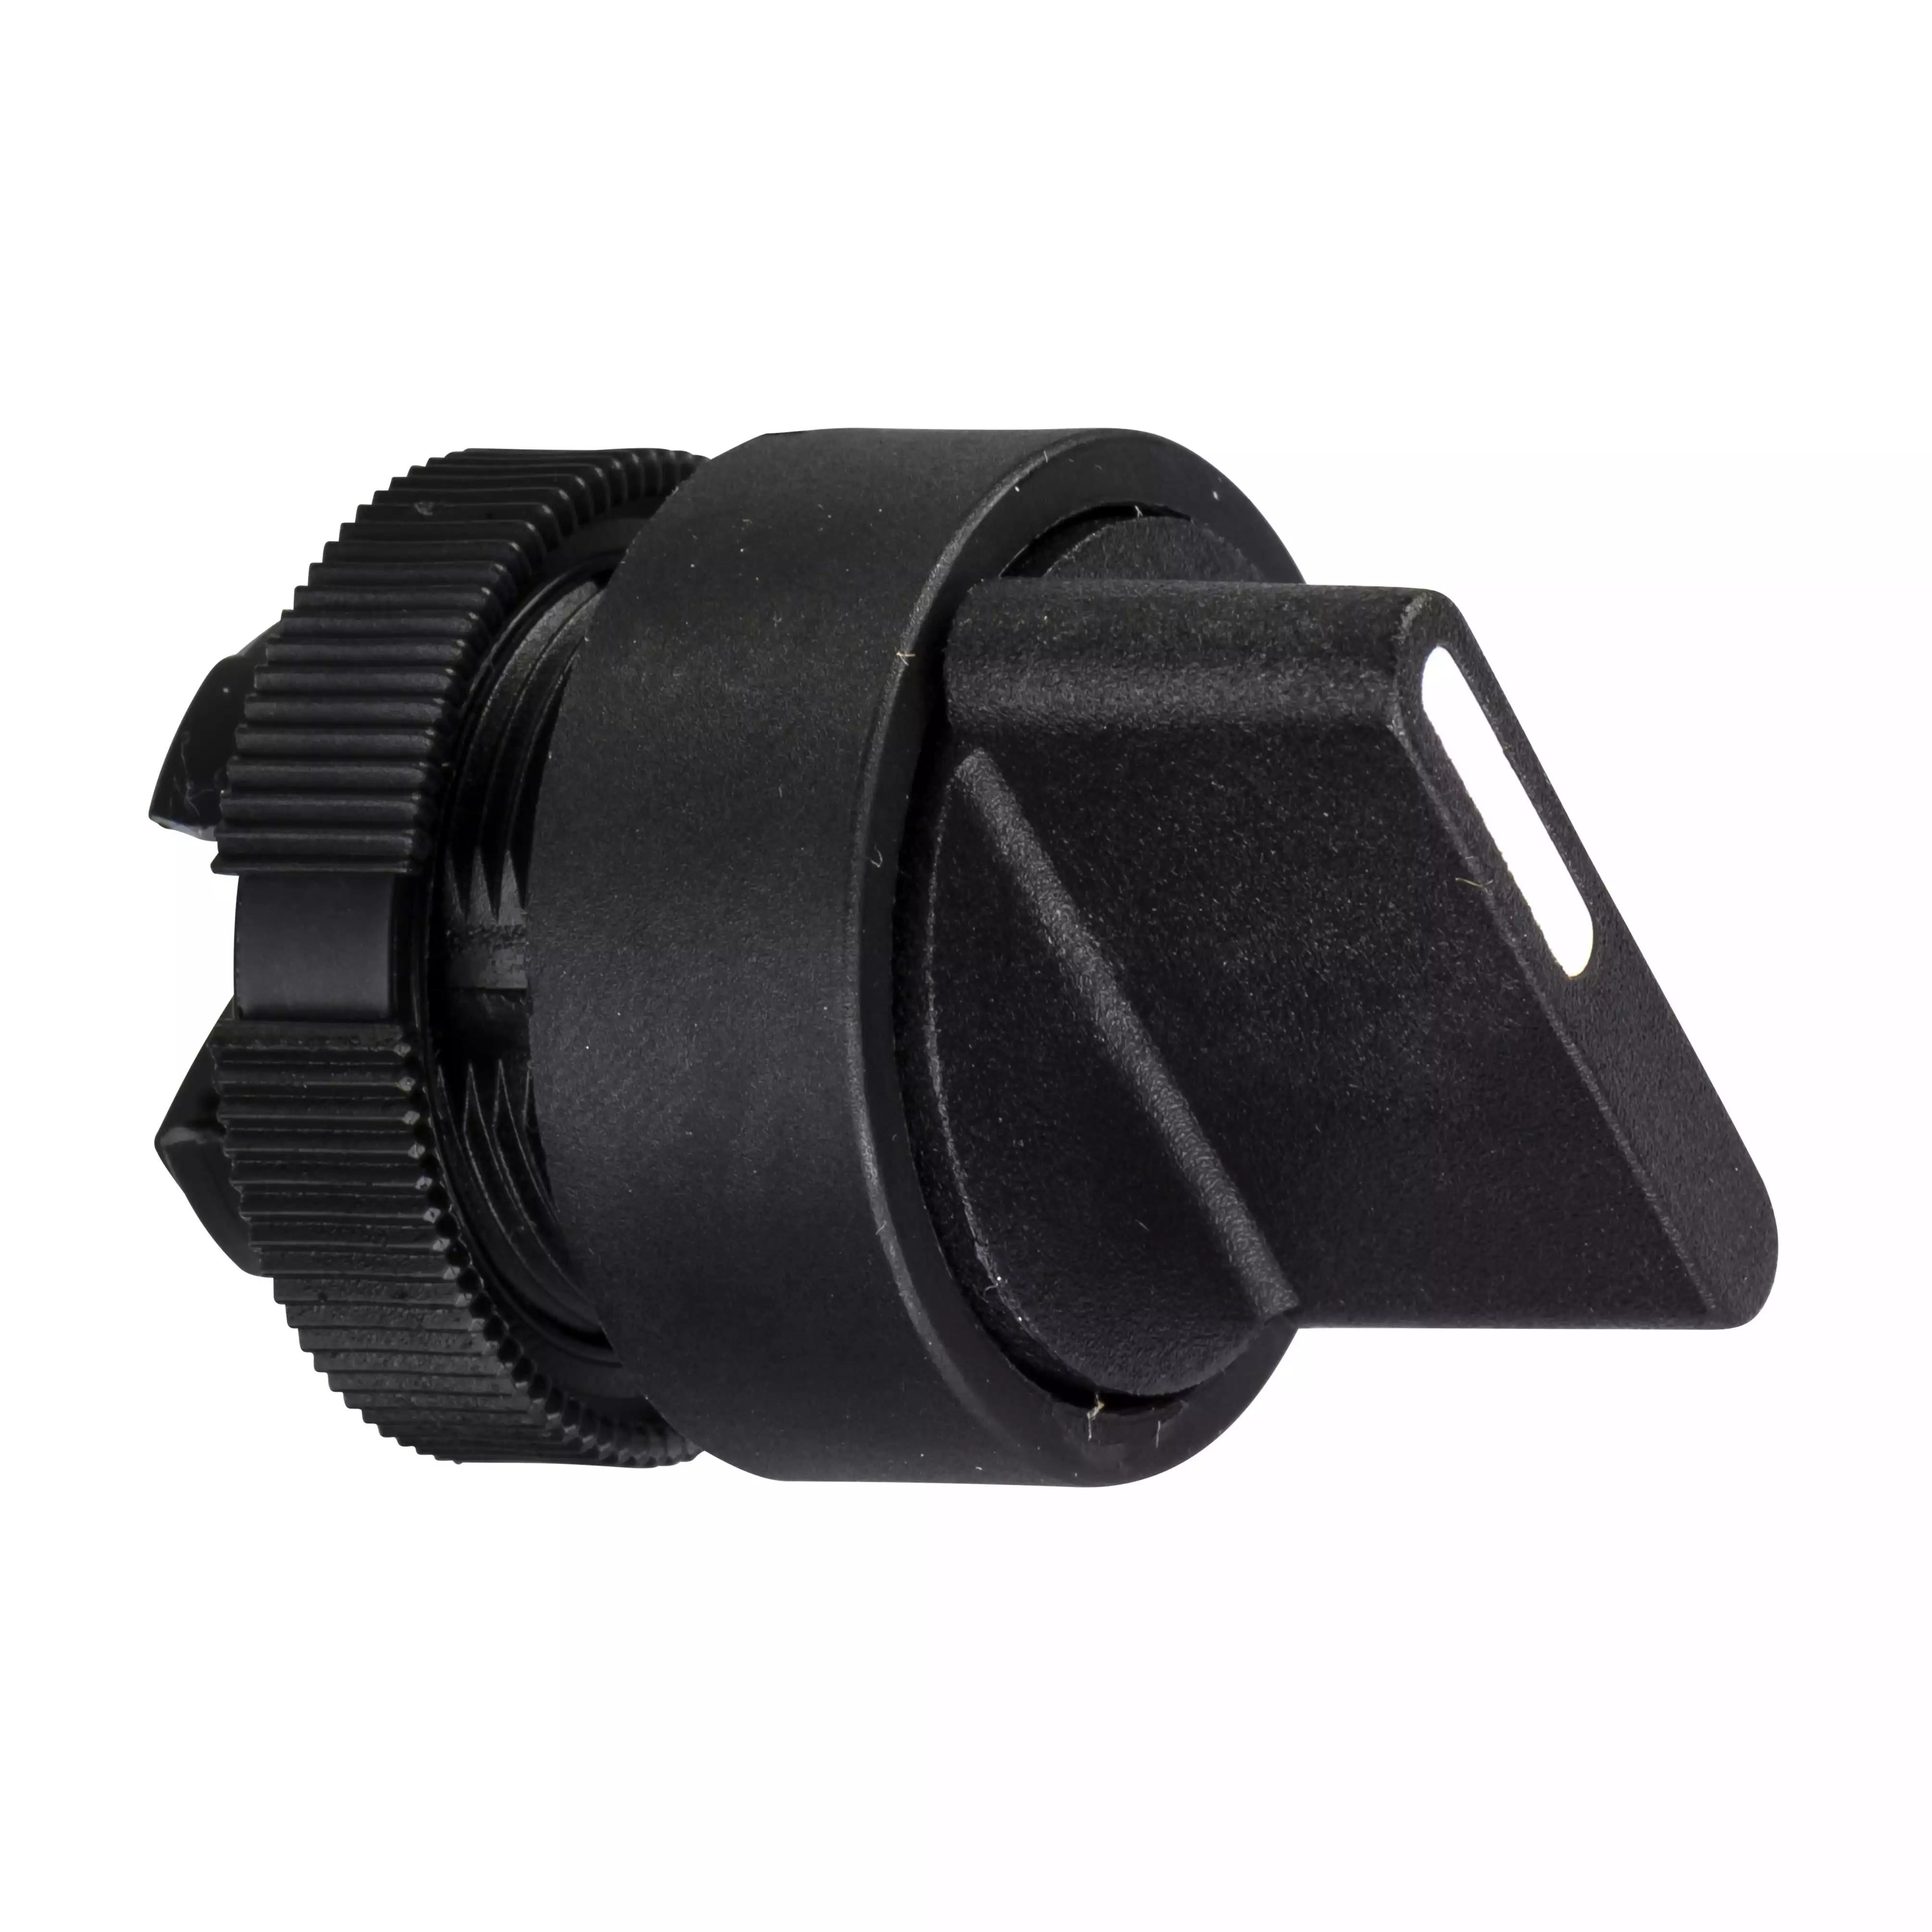 black selector switch - 2 positions - standard handle